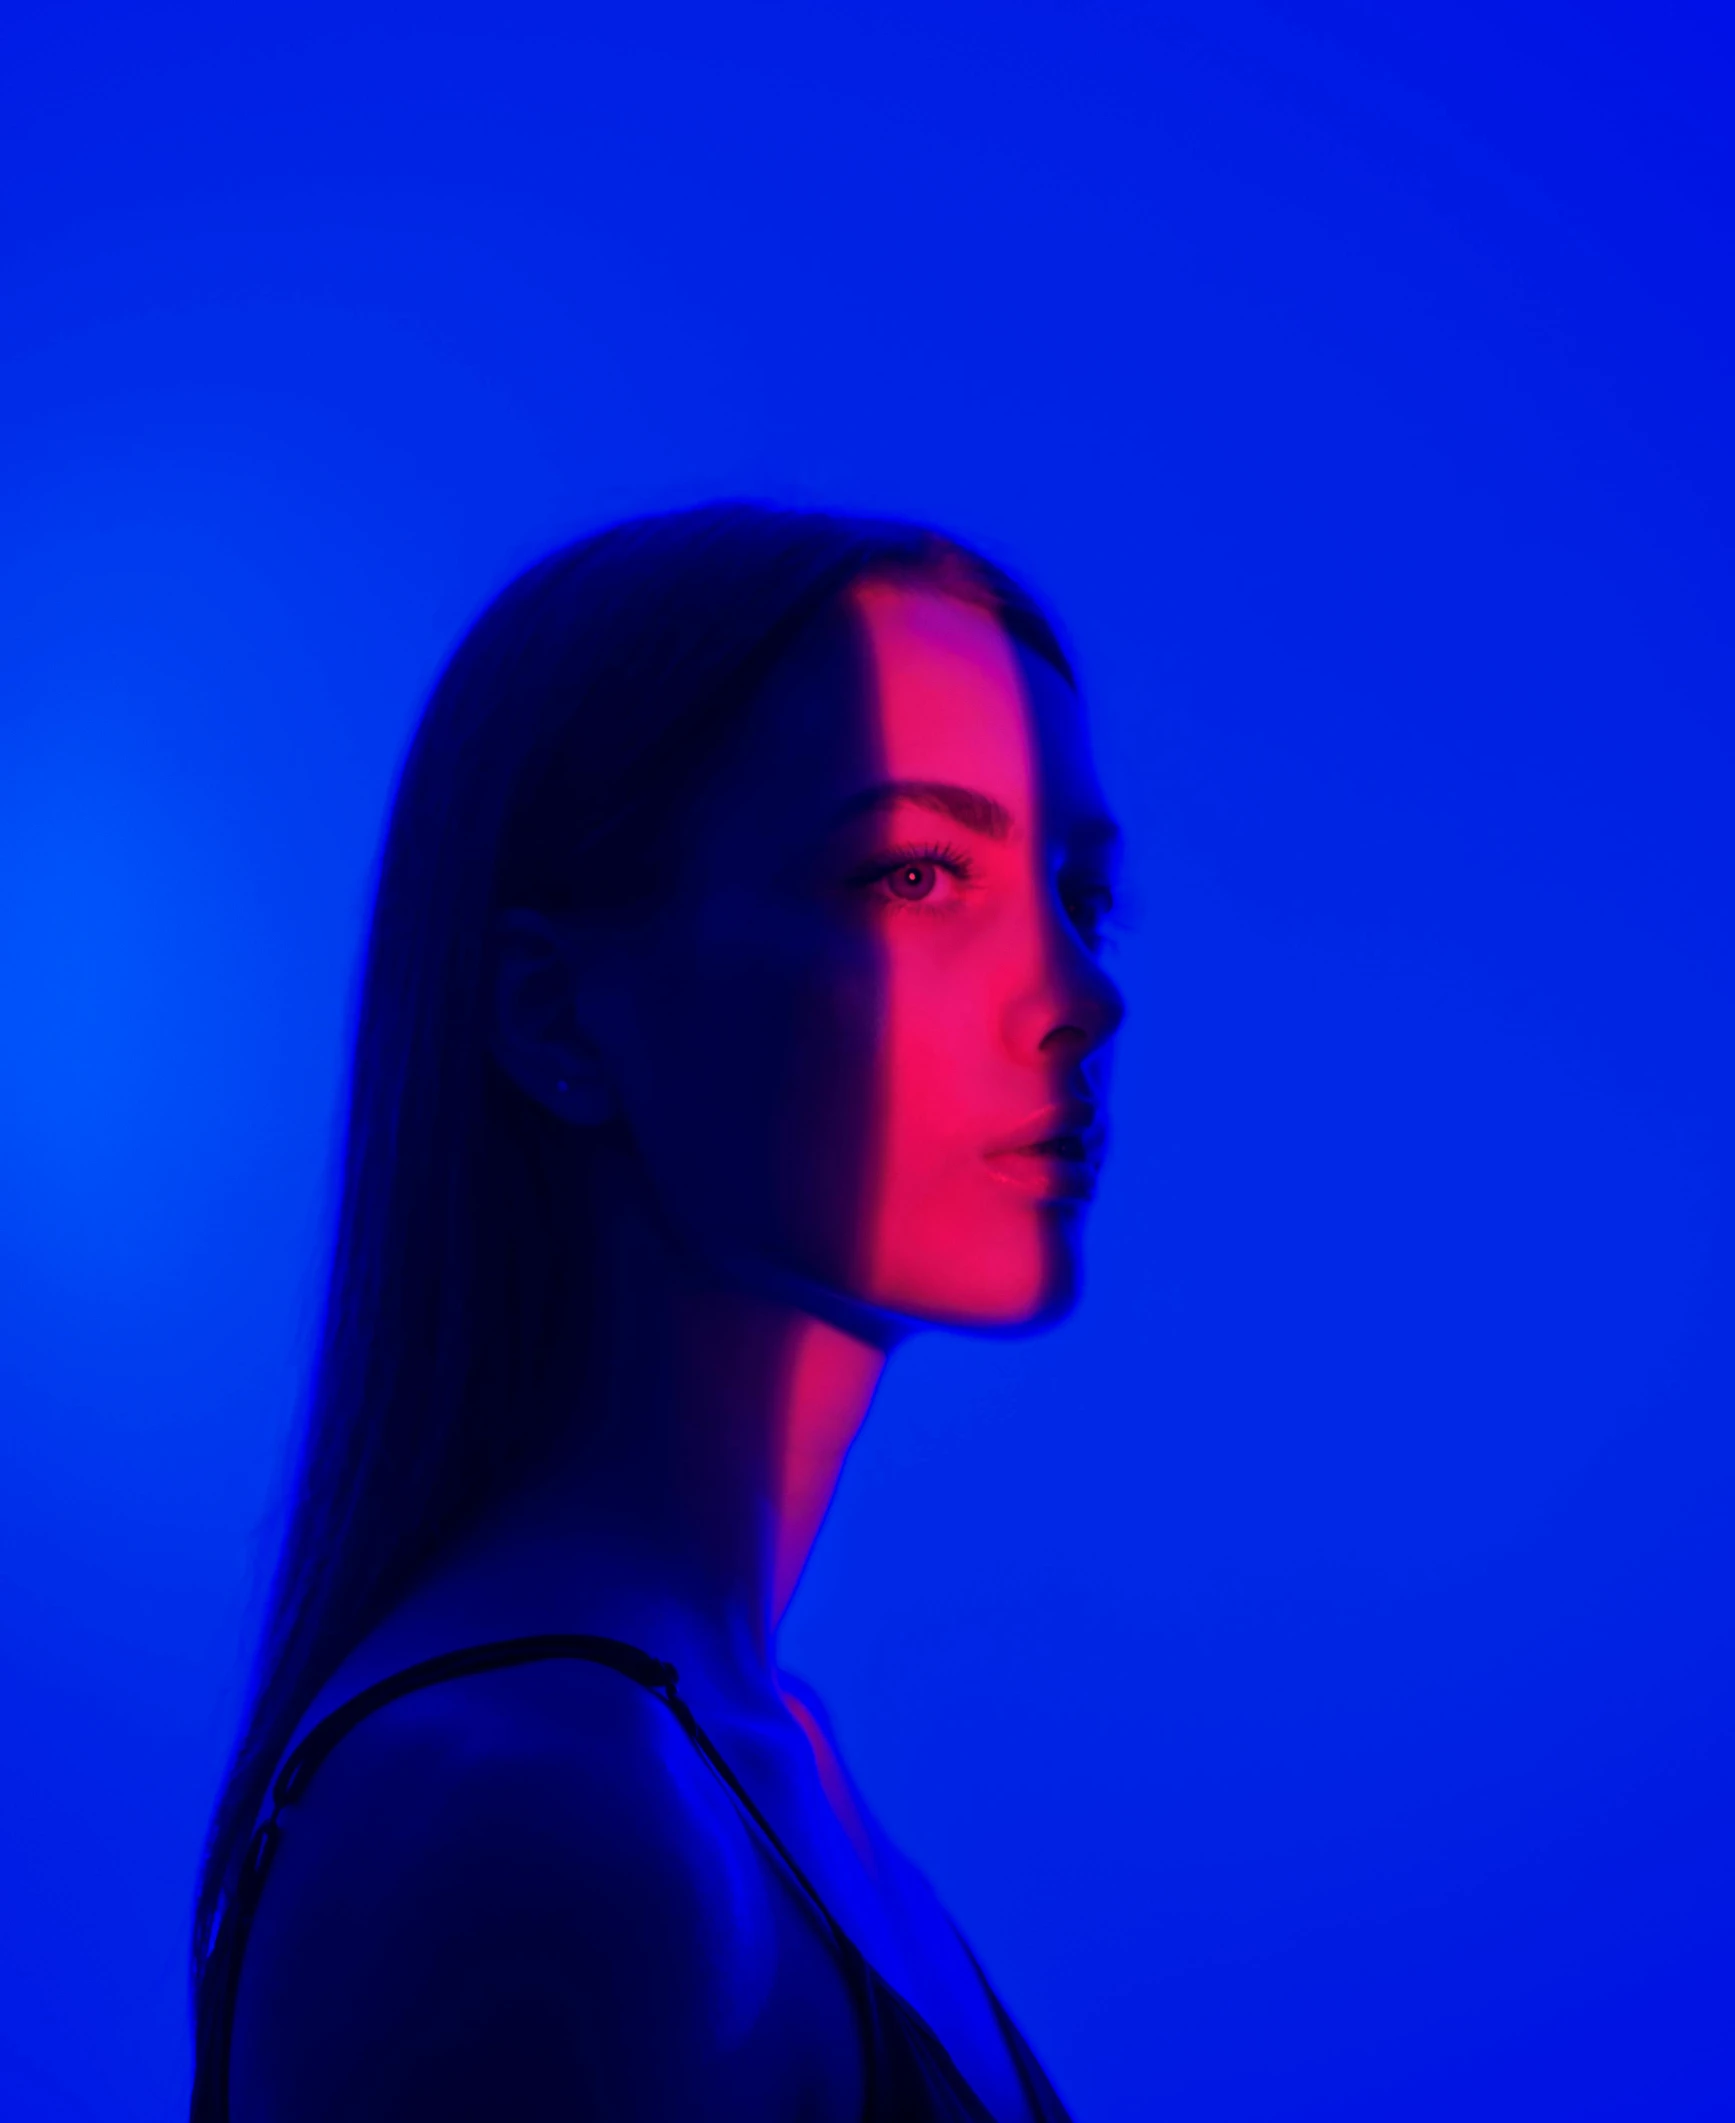 a woman standing in front of a blue background, an album cover, inspired by Elsa Bleda, color field, blue and red lights, looking away from camera, bella poarch, asher duran